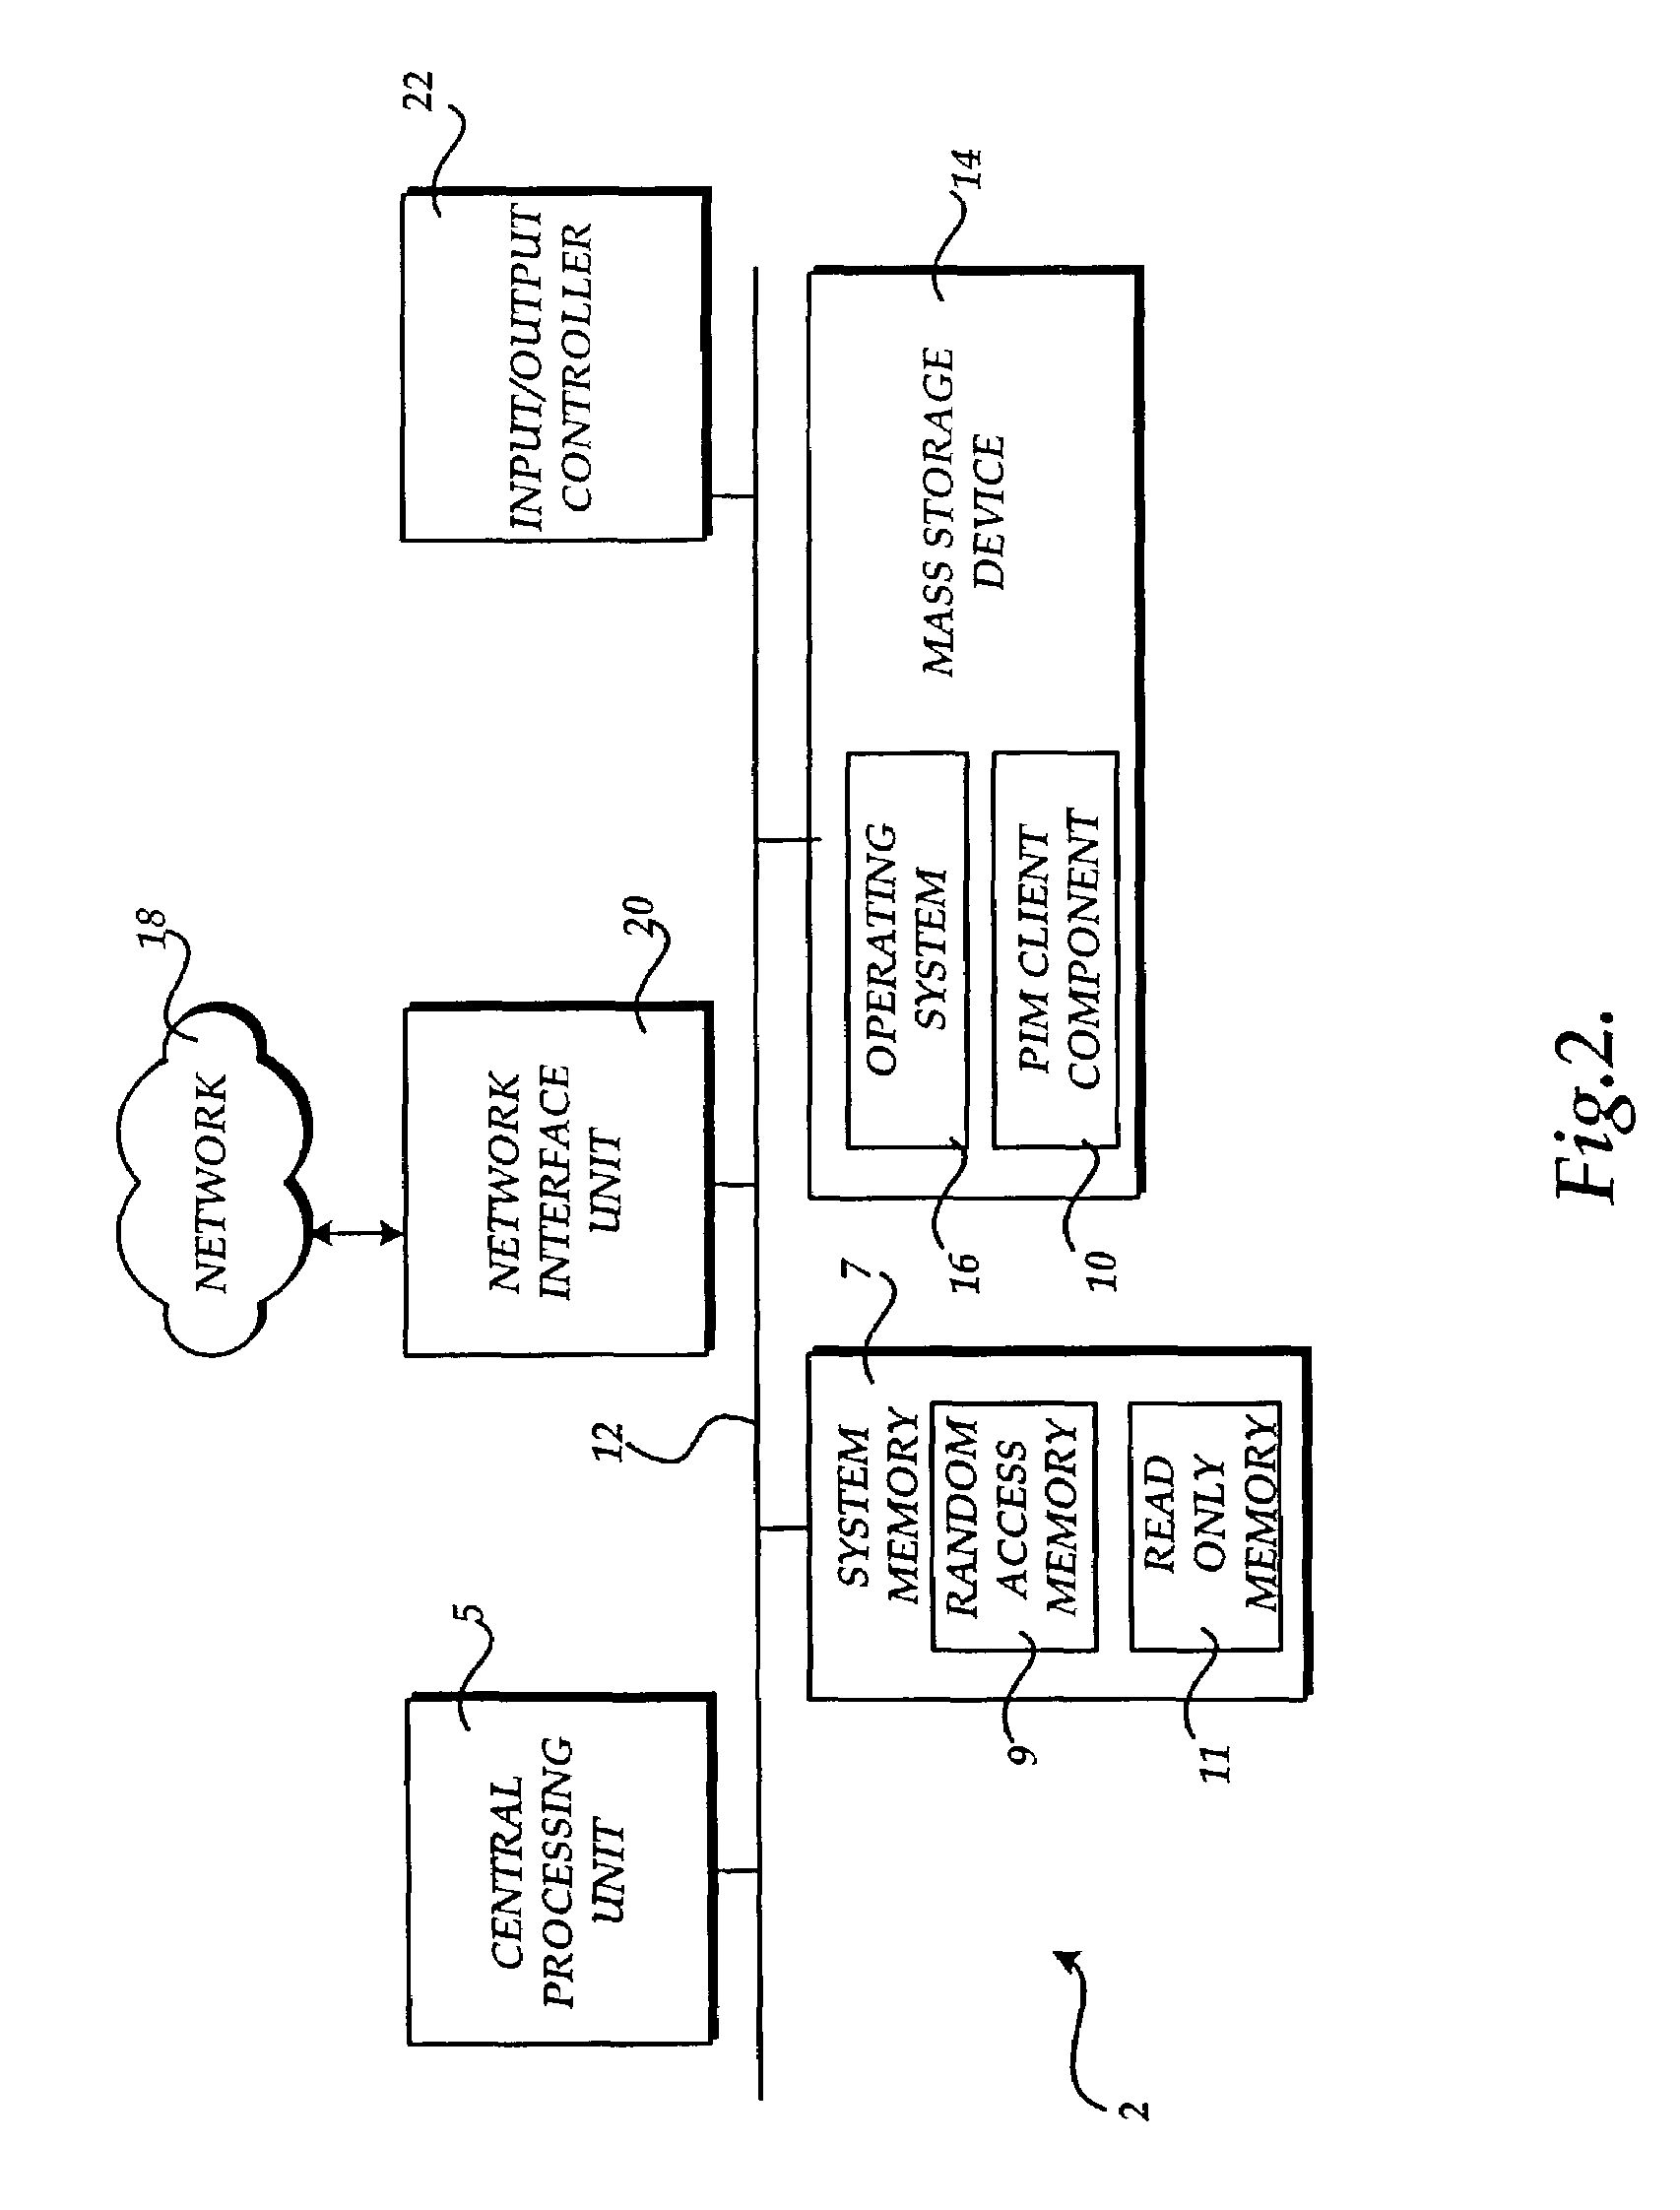 Method and apparatus for managing list items